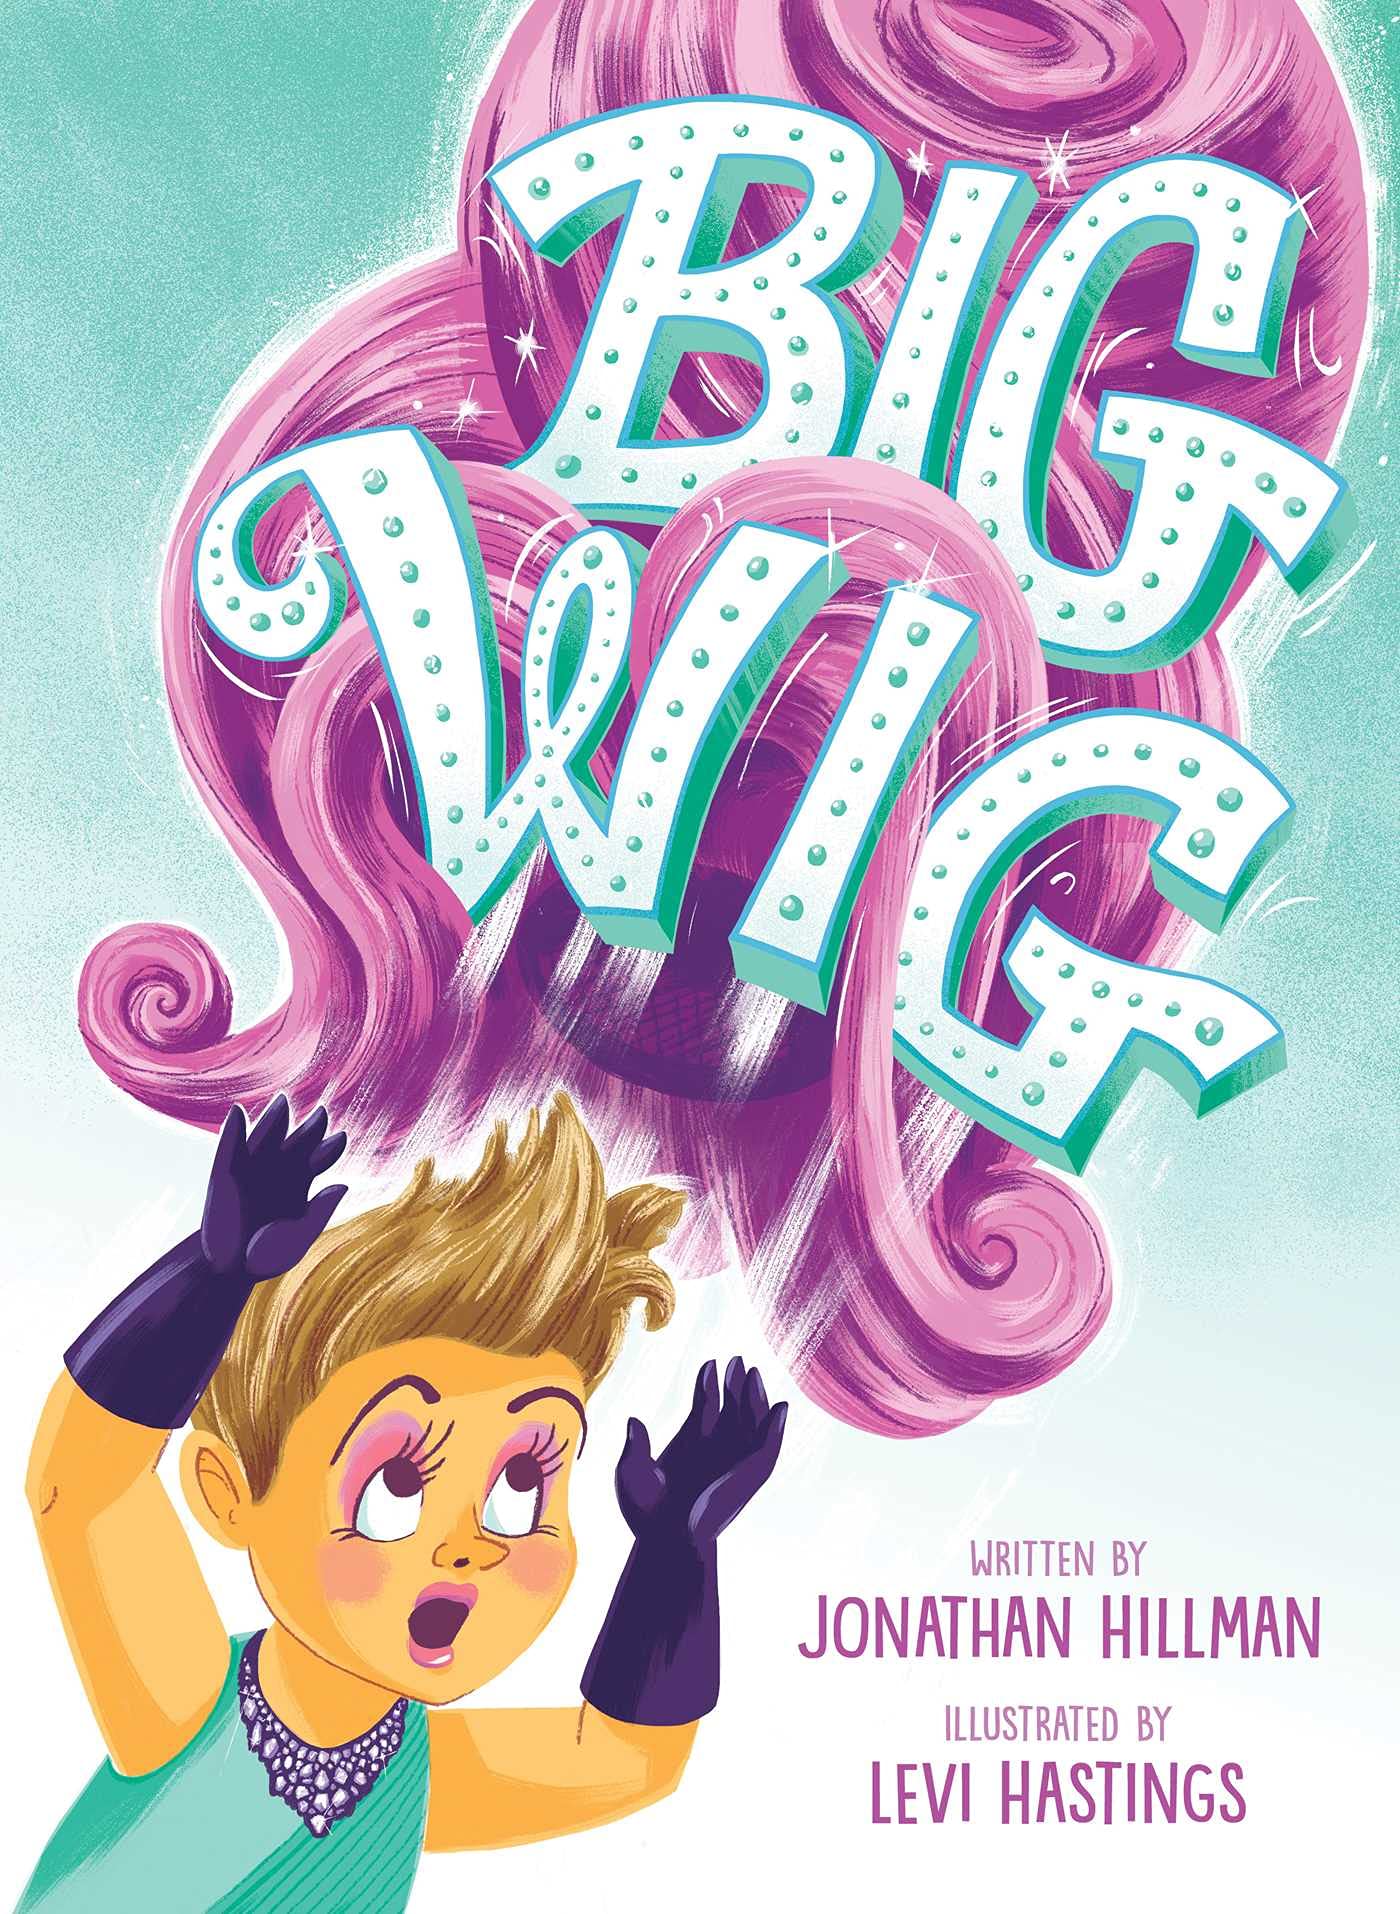 Big Wig - Signed Picture book